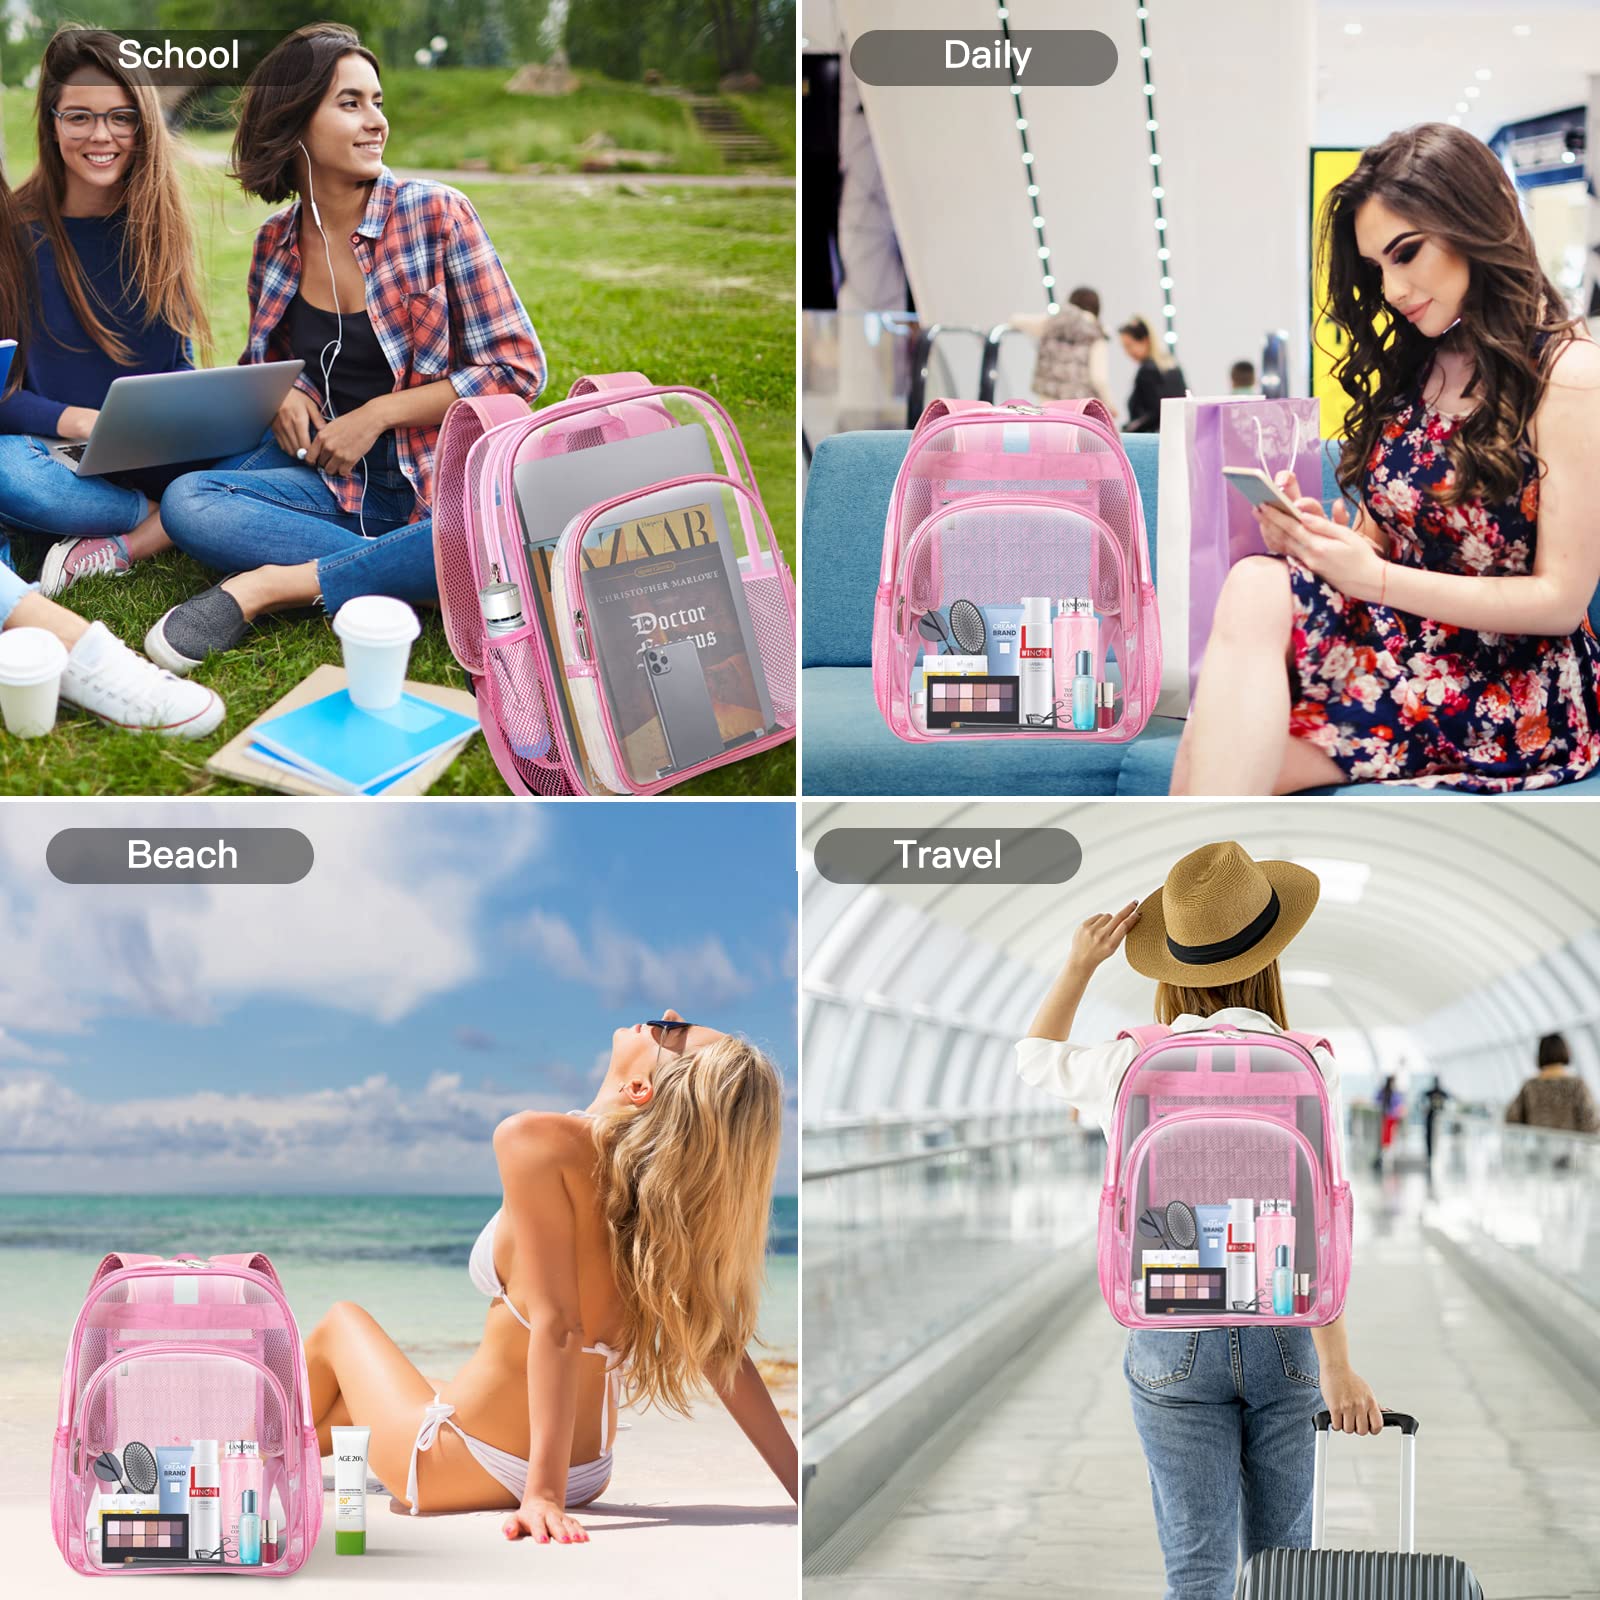 Clear Backpack Heavy Duty PVC Transparent Backpack for School Travel Work